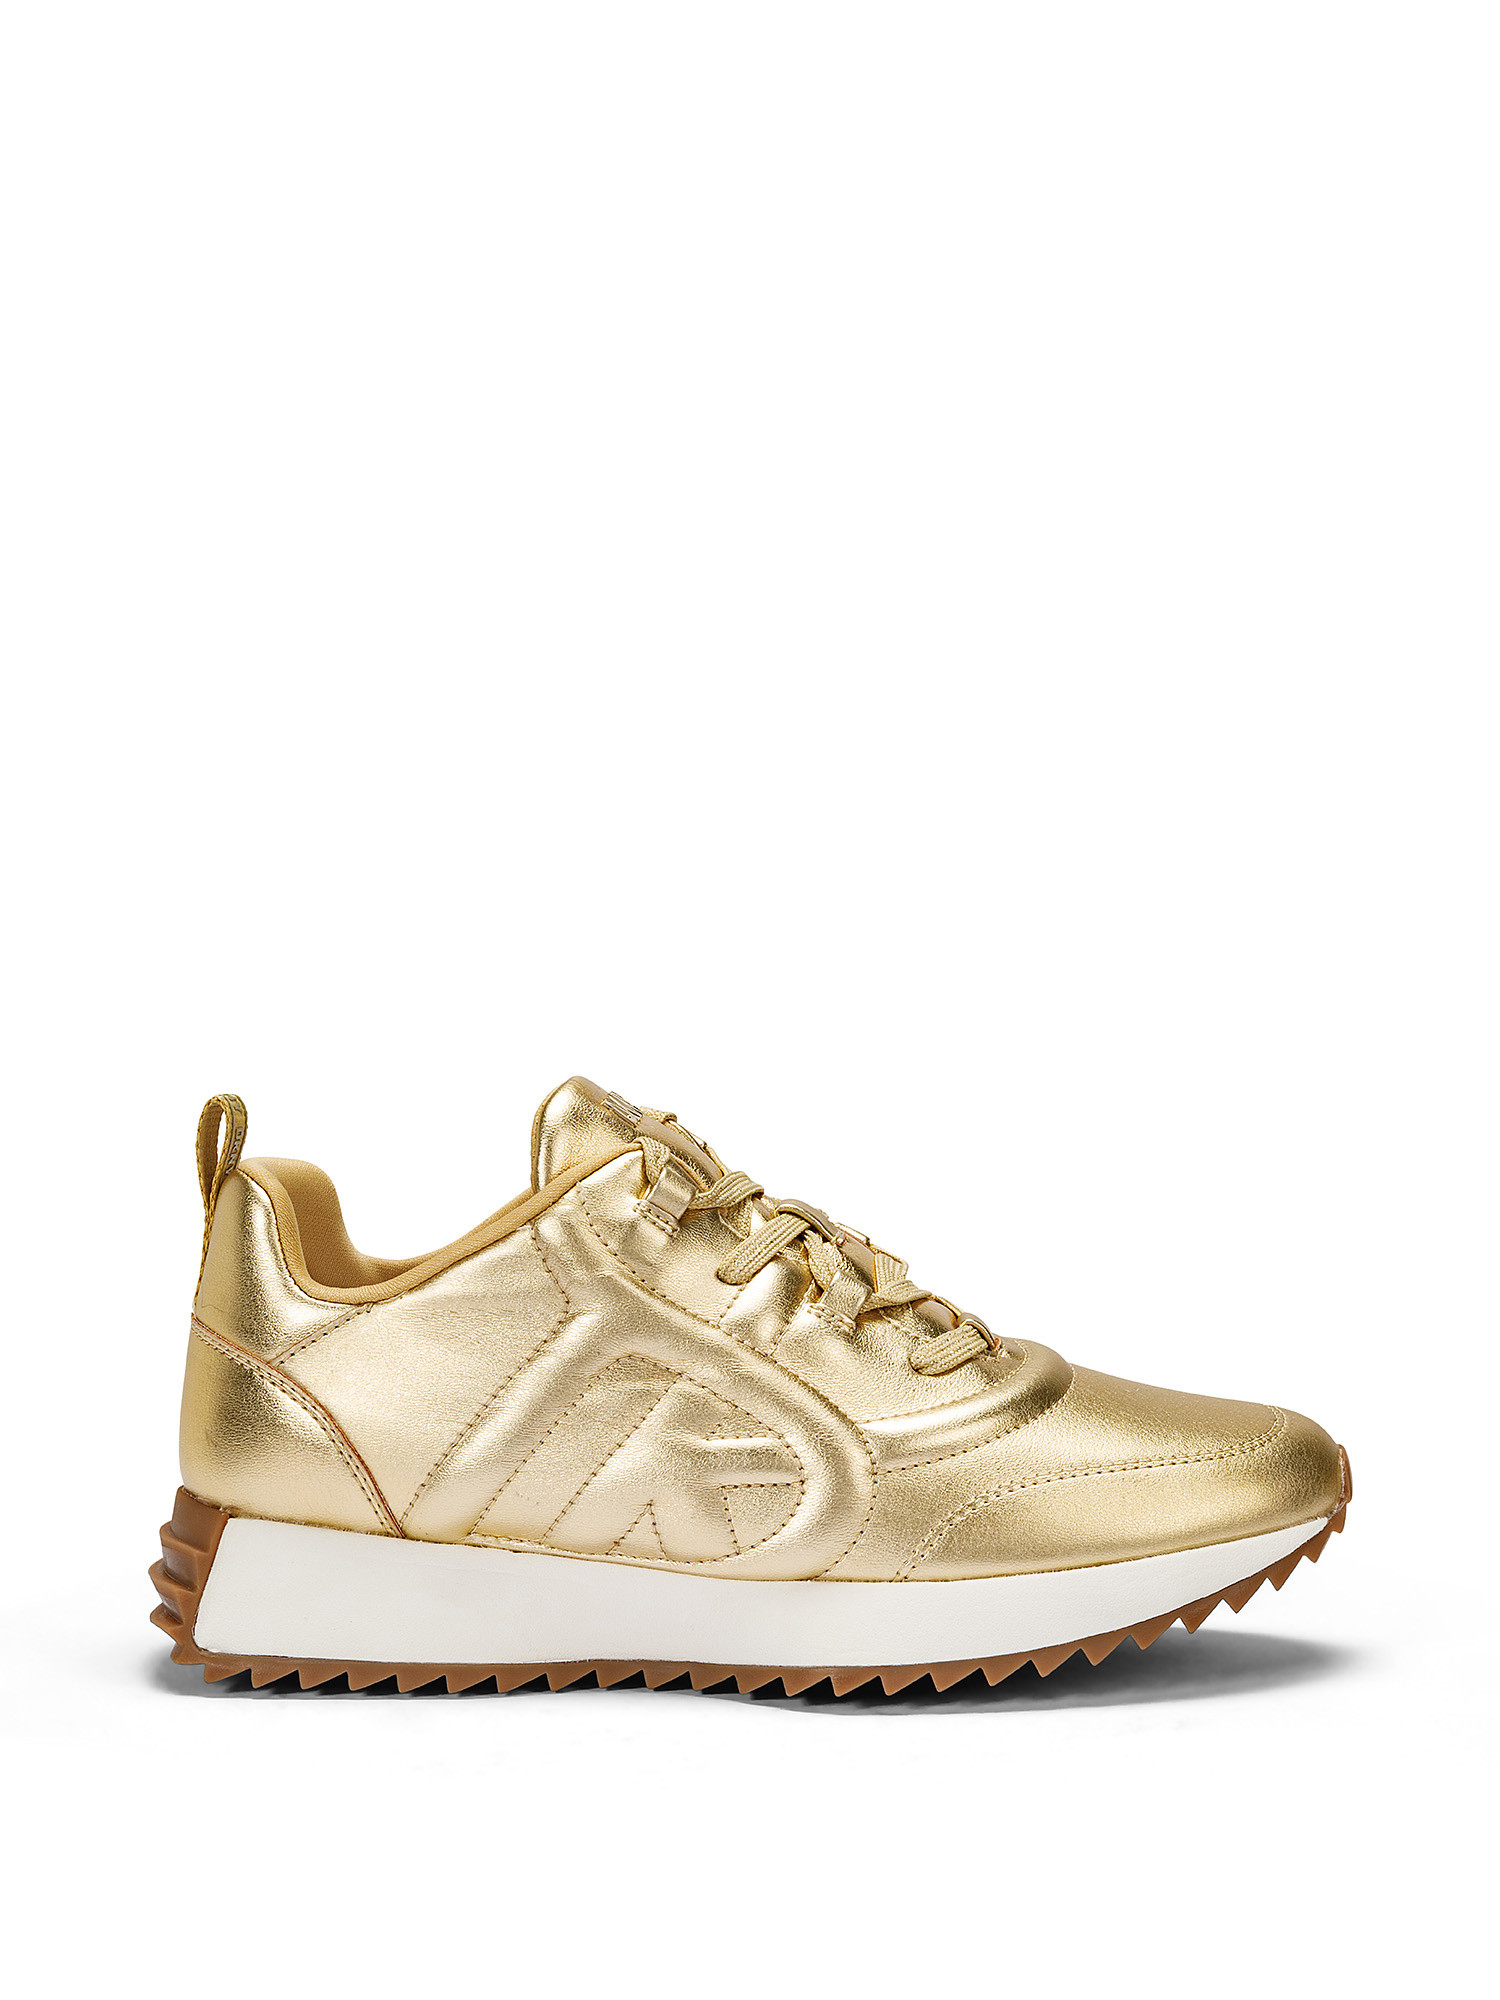 DKNY - Sneakers NIX, Gold, large image number 0